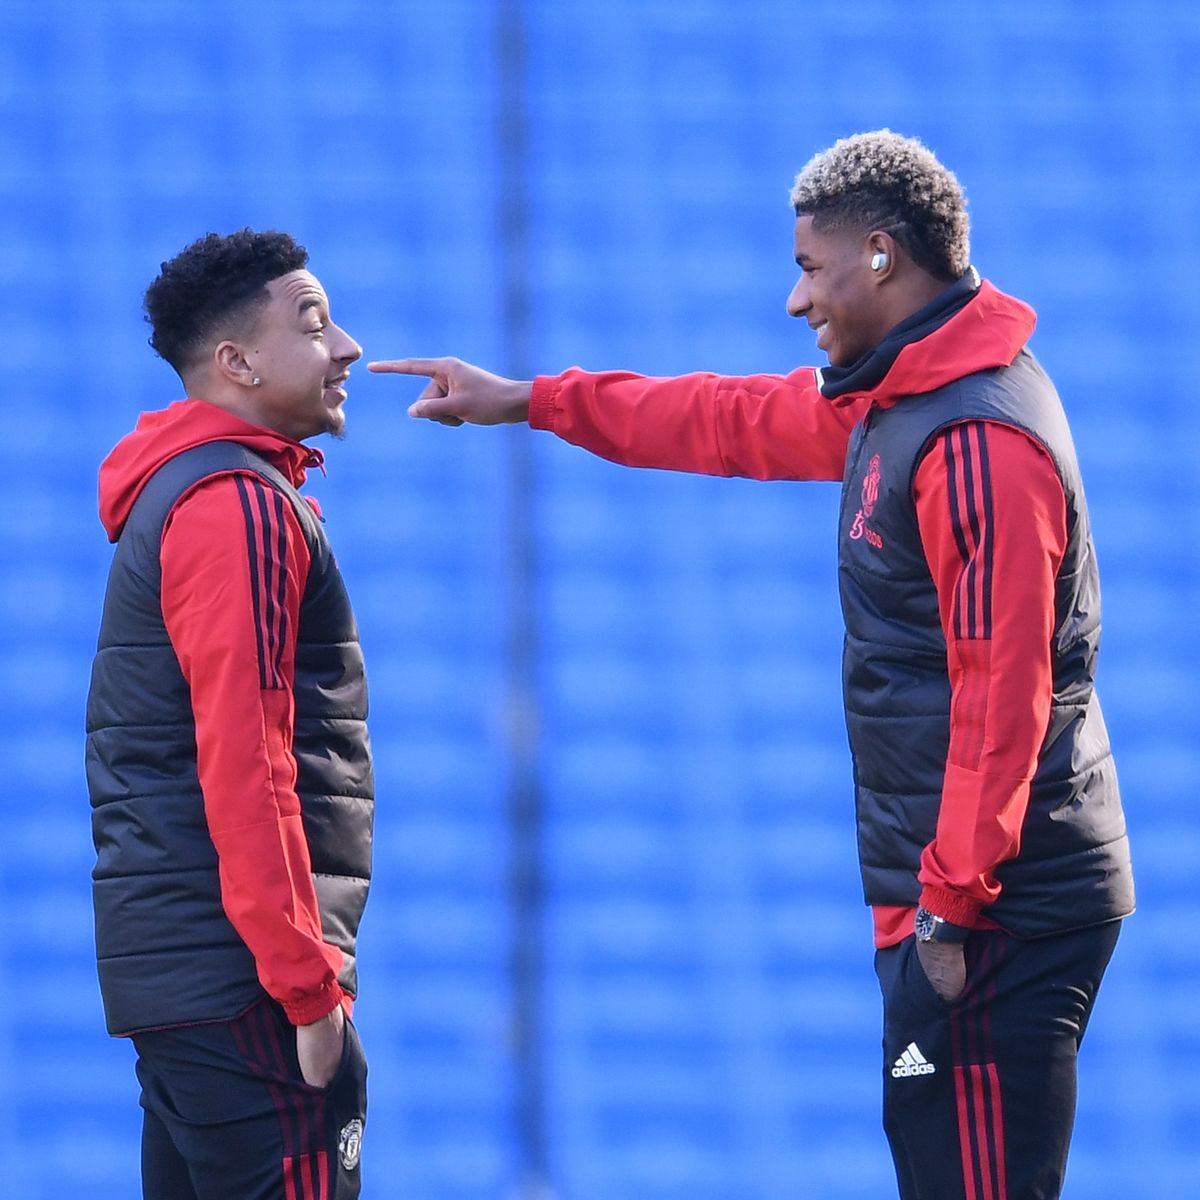 Marcus Rashford and Jesse Lingard arguing over pointless things 

A THREAD